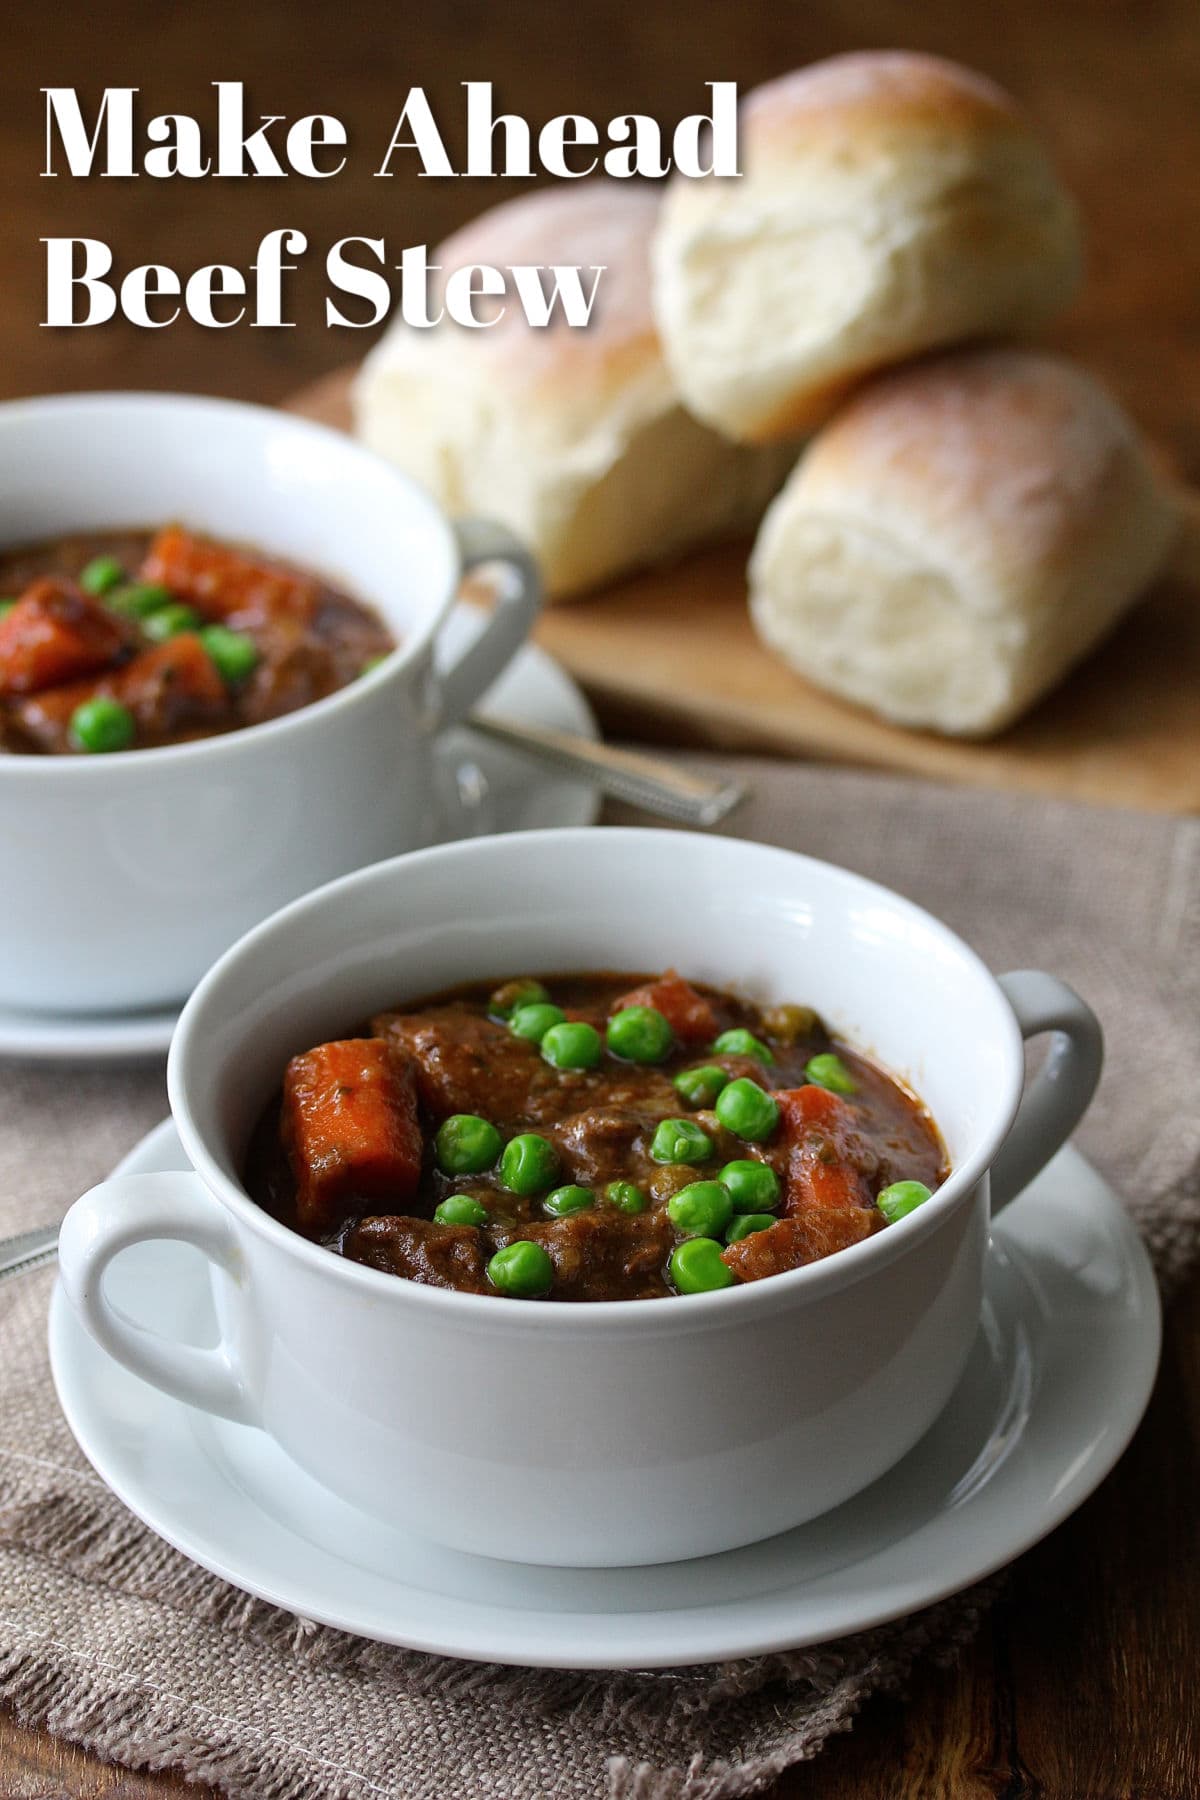 Beef stew in bowls.